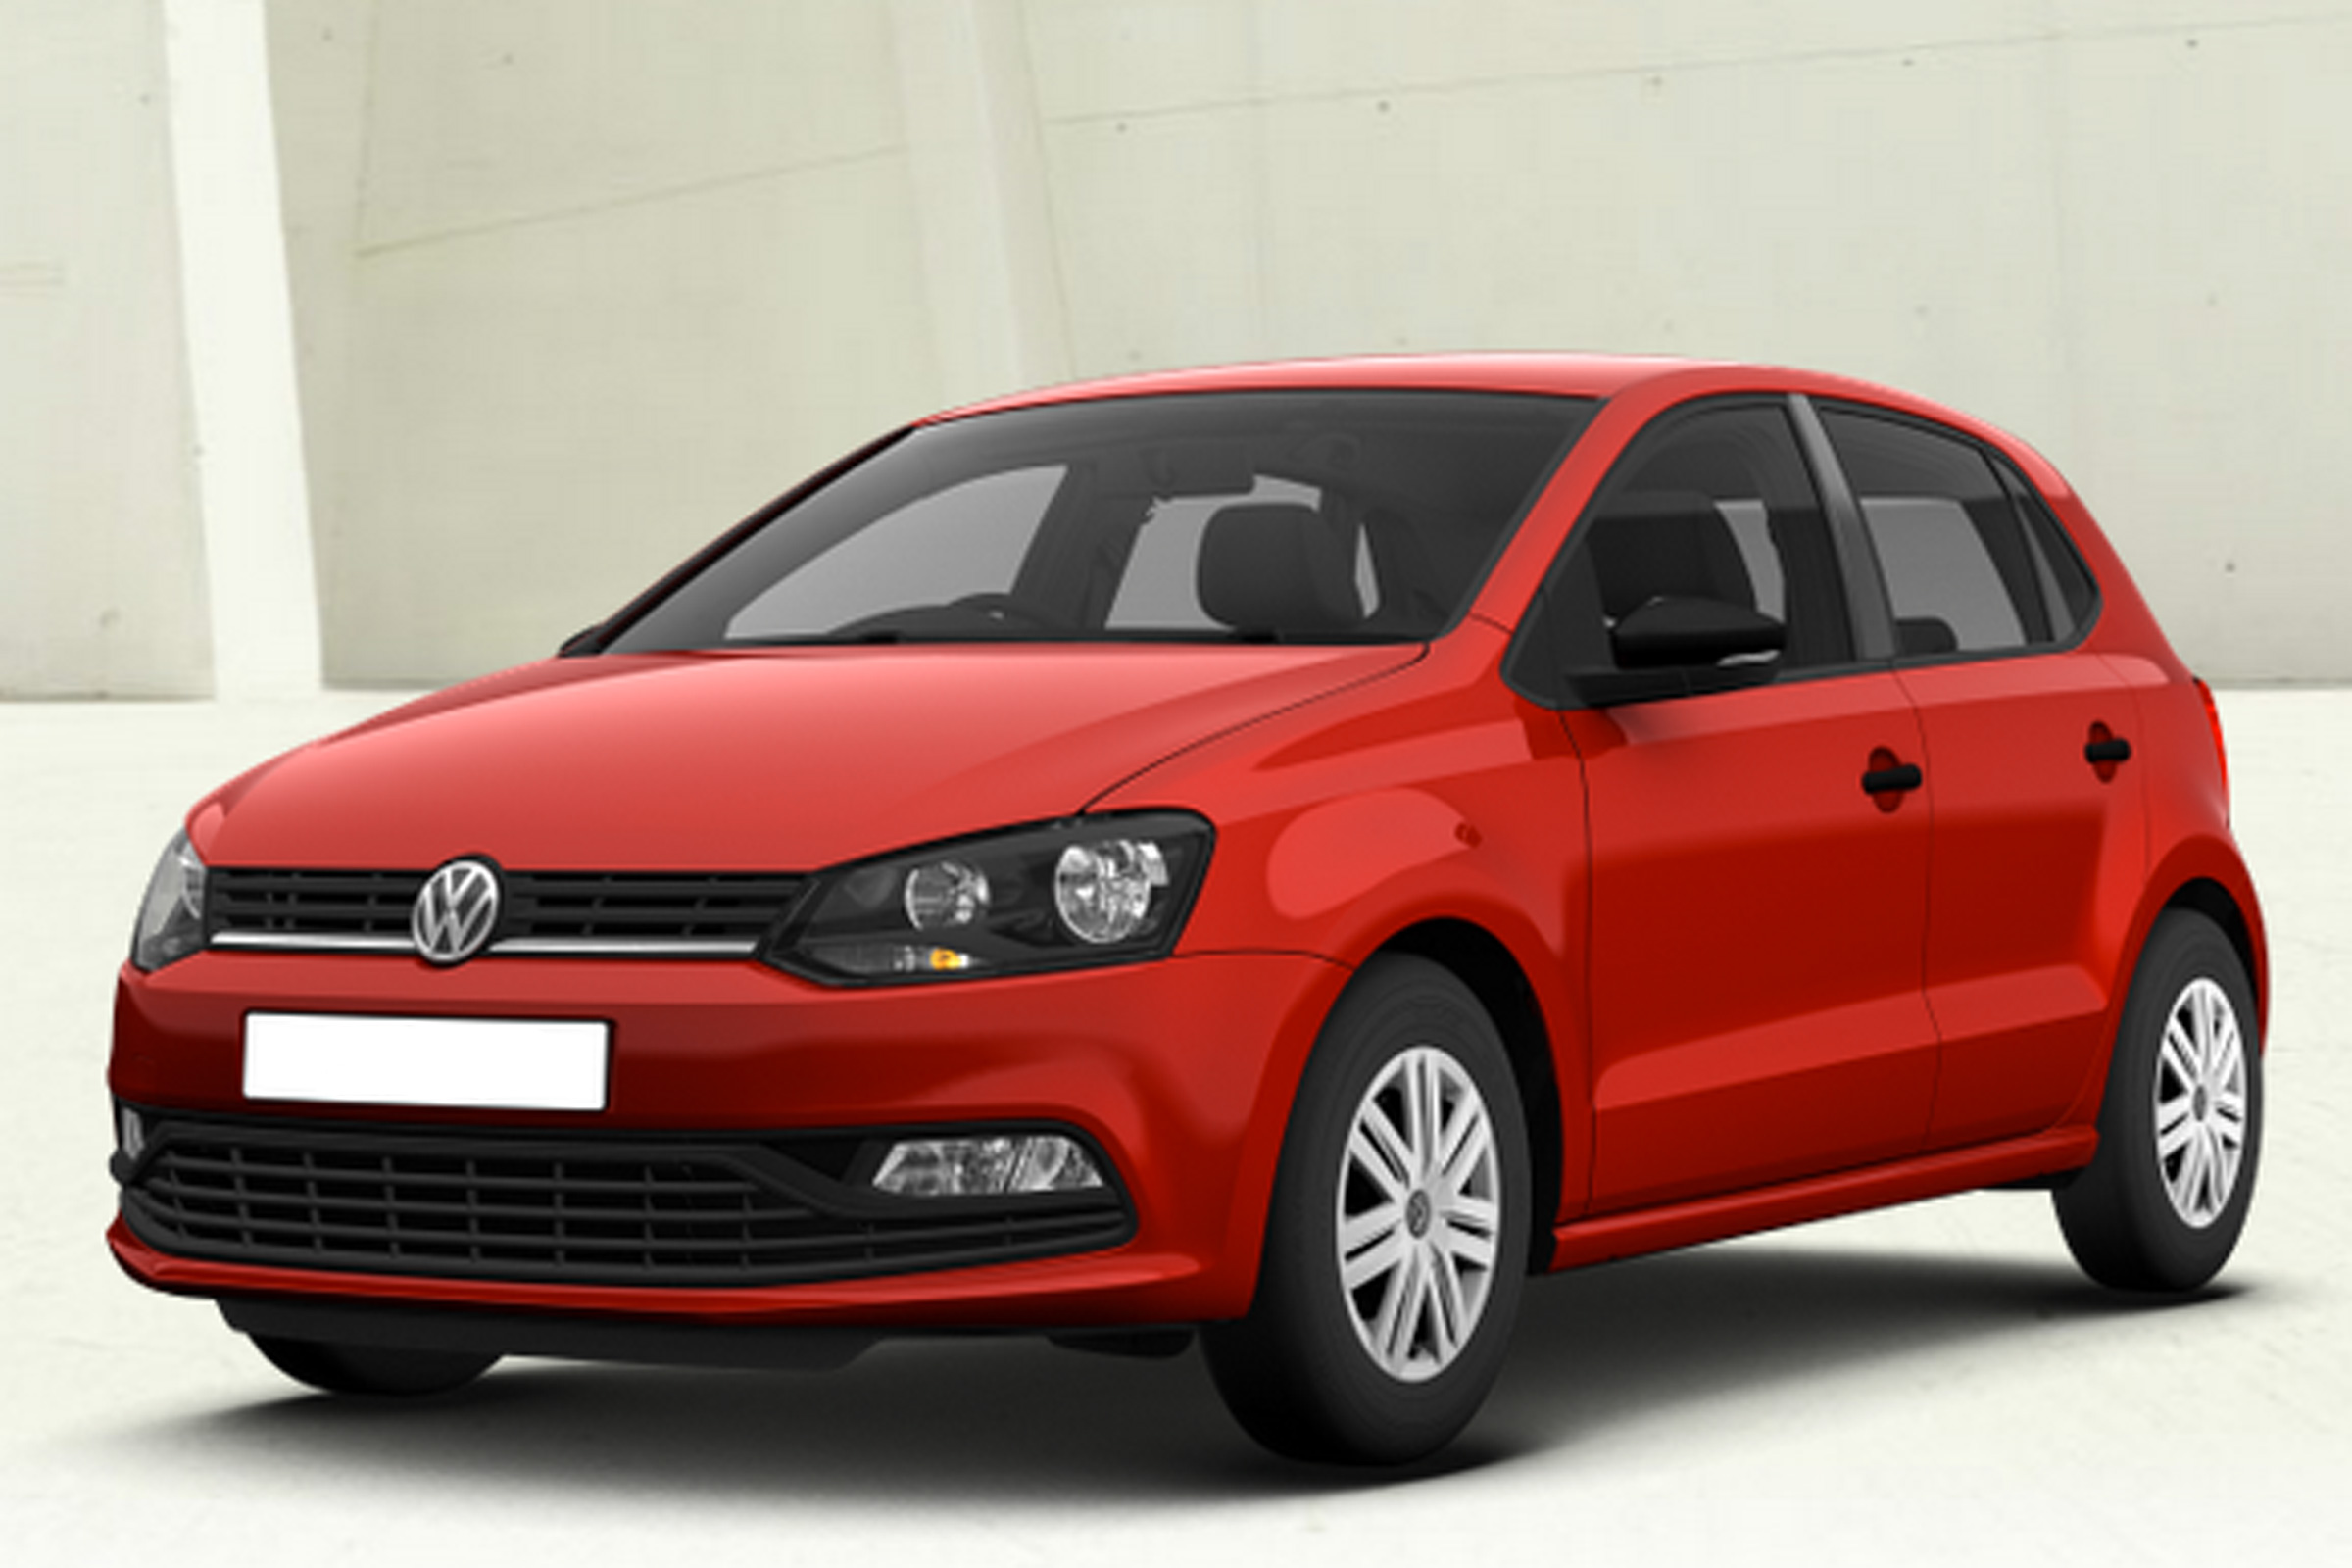 Volkswagen Polo S review Carbuyer